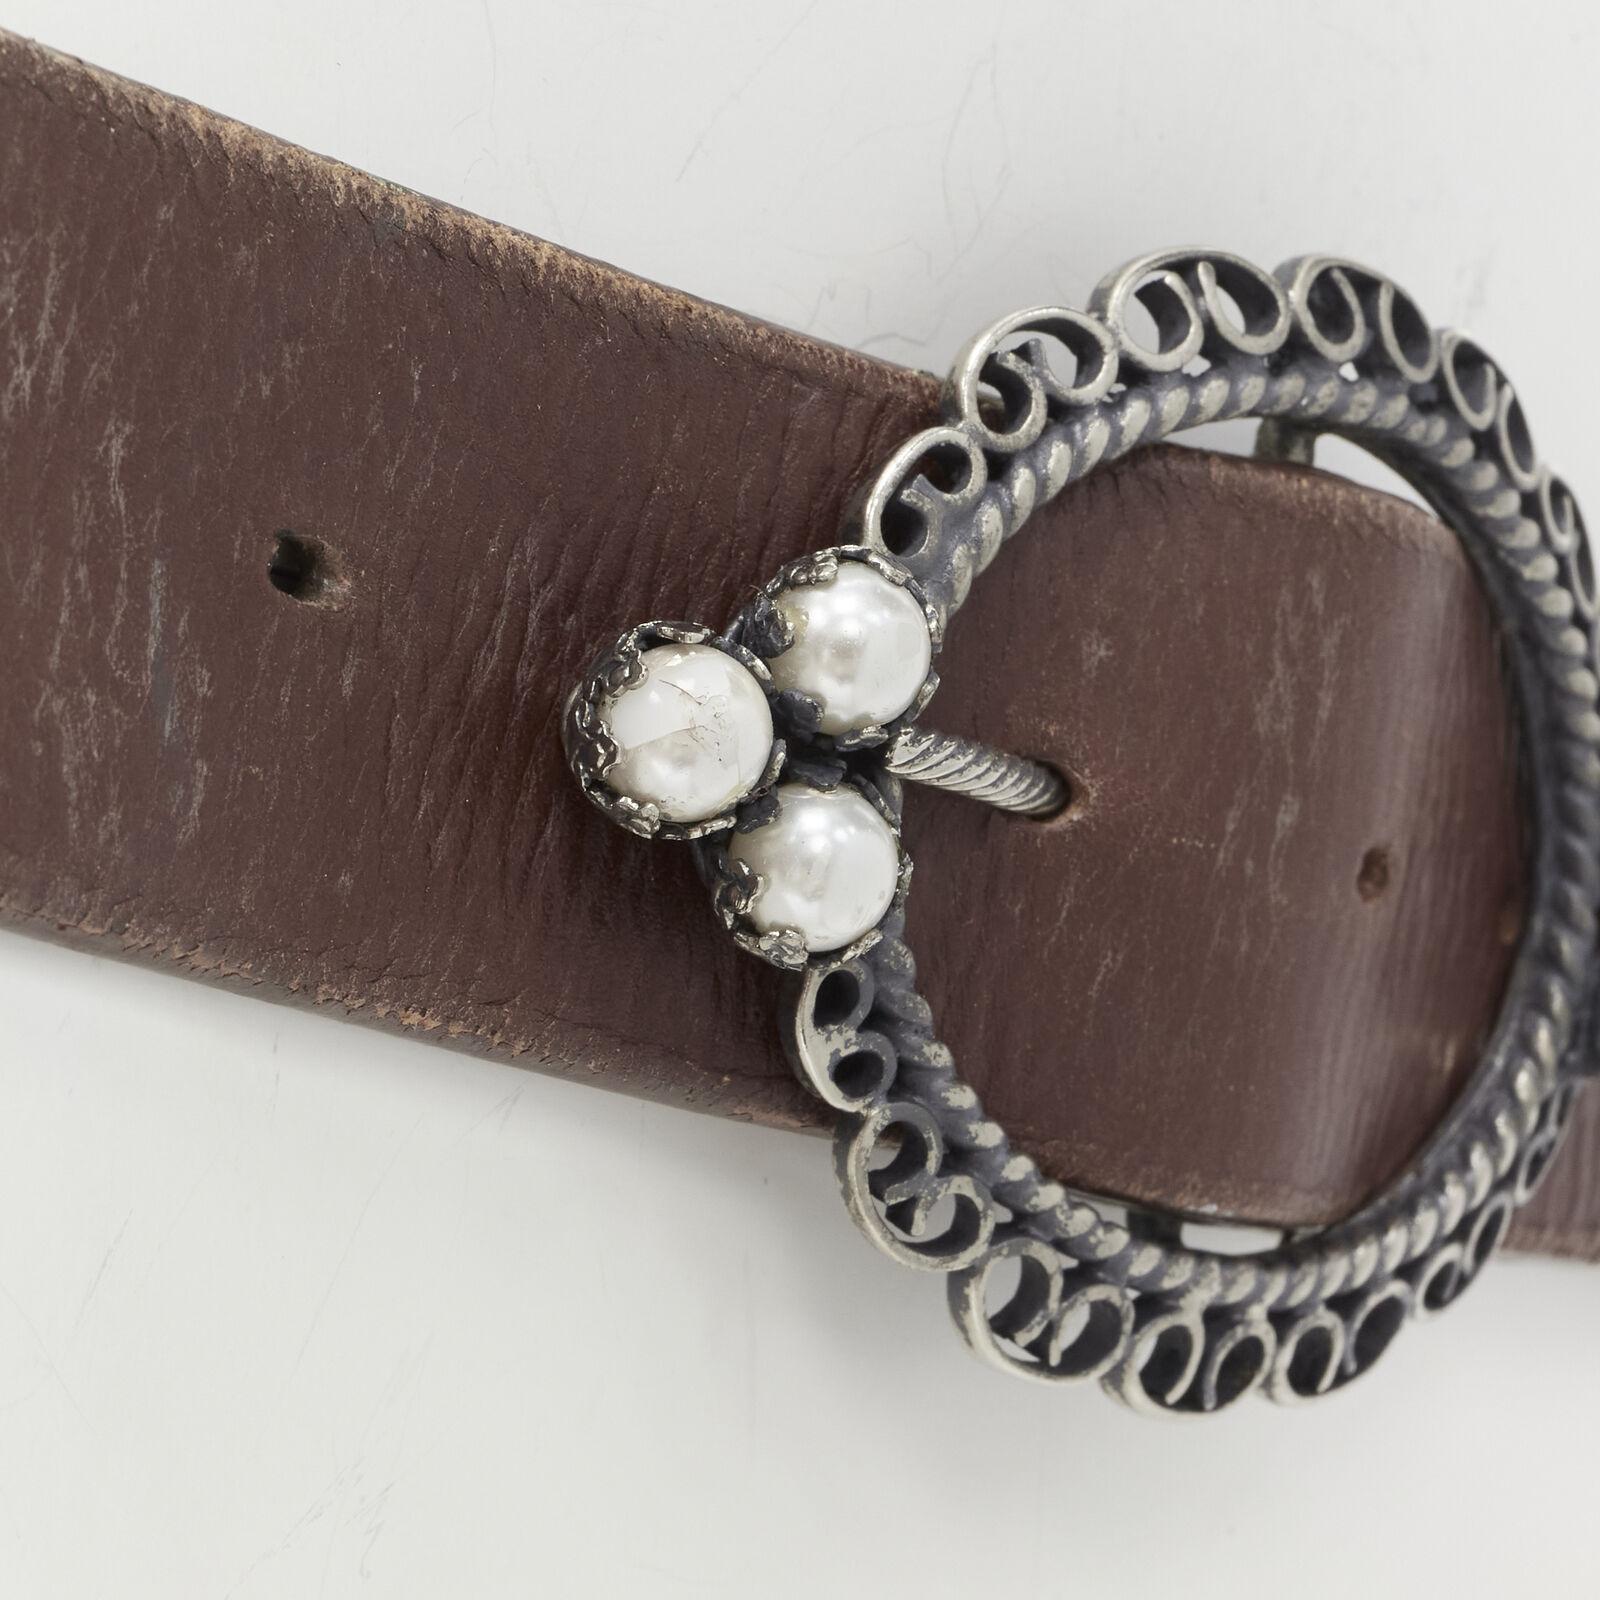 CHRISTIAN DIOR Vintage pearl embellished antique buckle brown cowboy belt
Reference: ANWU/A00856
Brand: Christian Dior
Material: Leather
Color: Brown
Closure: Belt

CONDITION:
Condition: Poor, this item was pre-owned and is in poor condition. Please